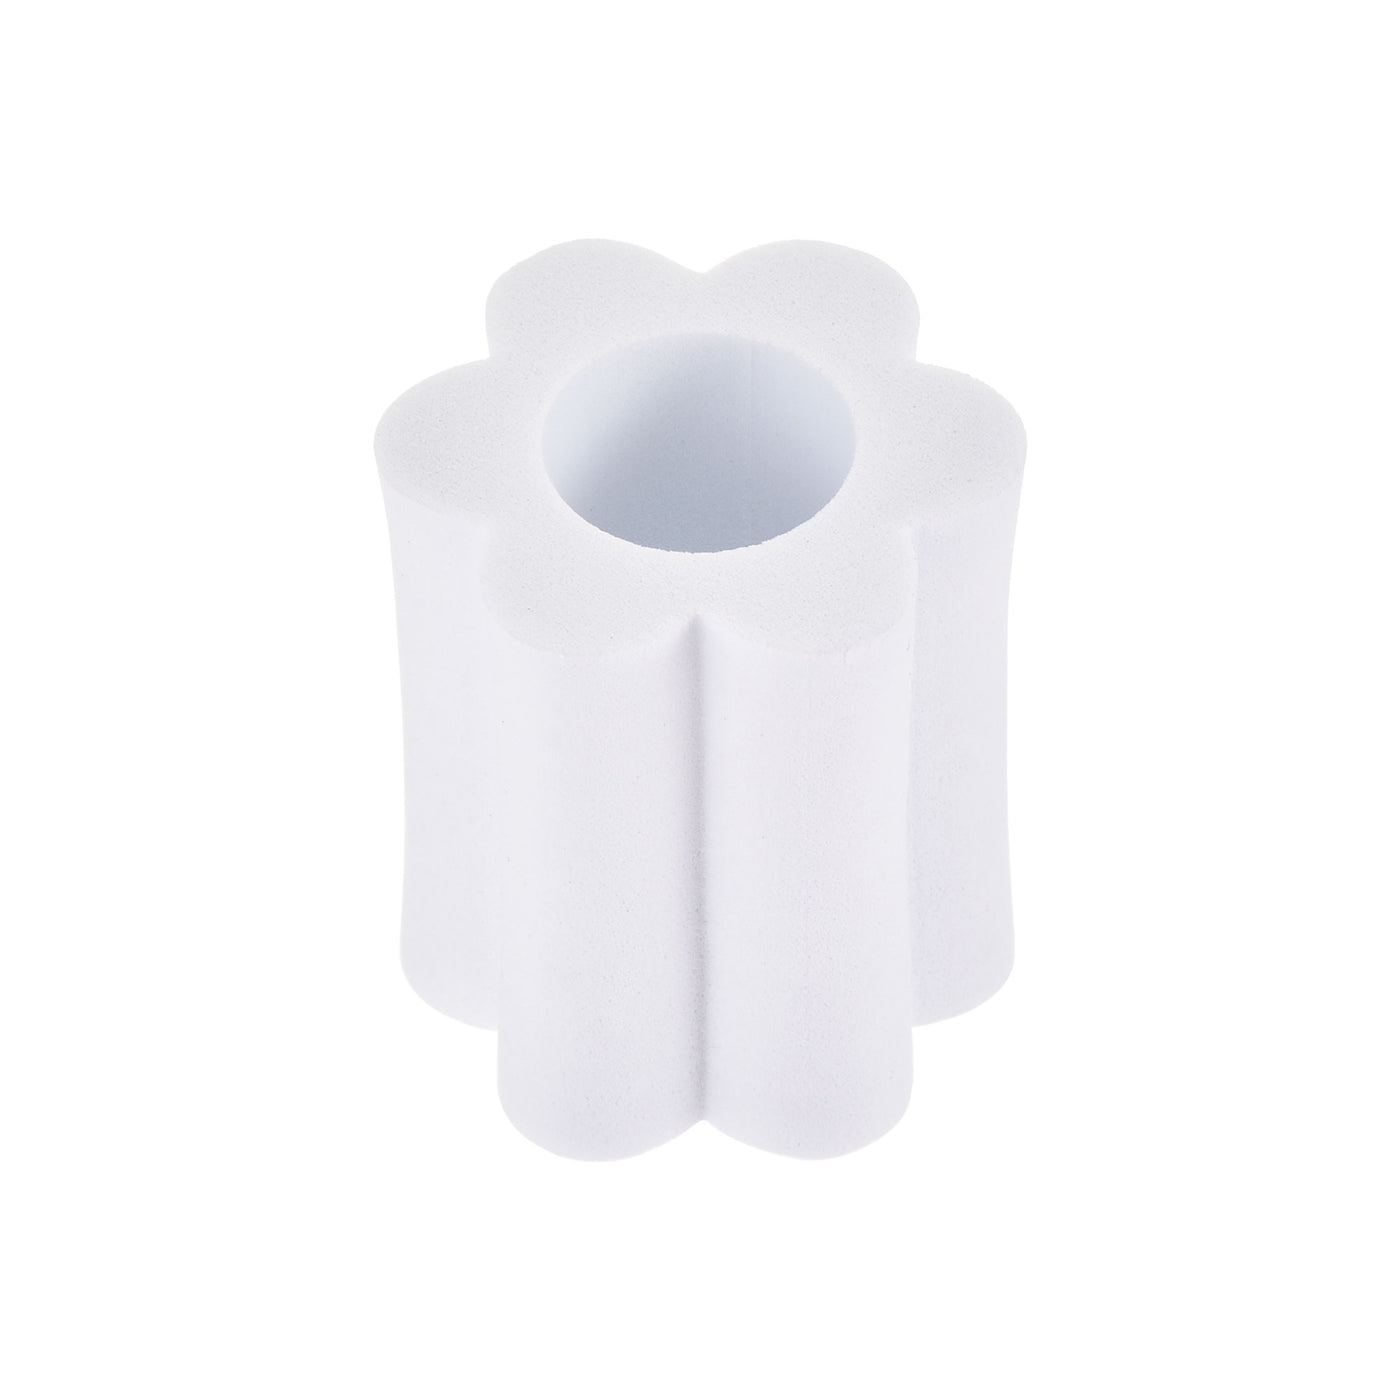 Uxcell Uxcell Cup Turner Foam 1.57 Inch Diameter Foam Inserts White for 3/4 Inch PVC Pipe 4Pcs